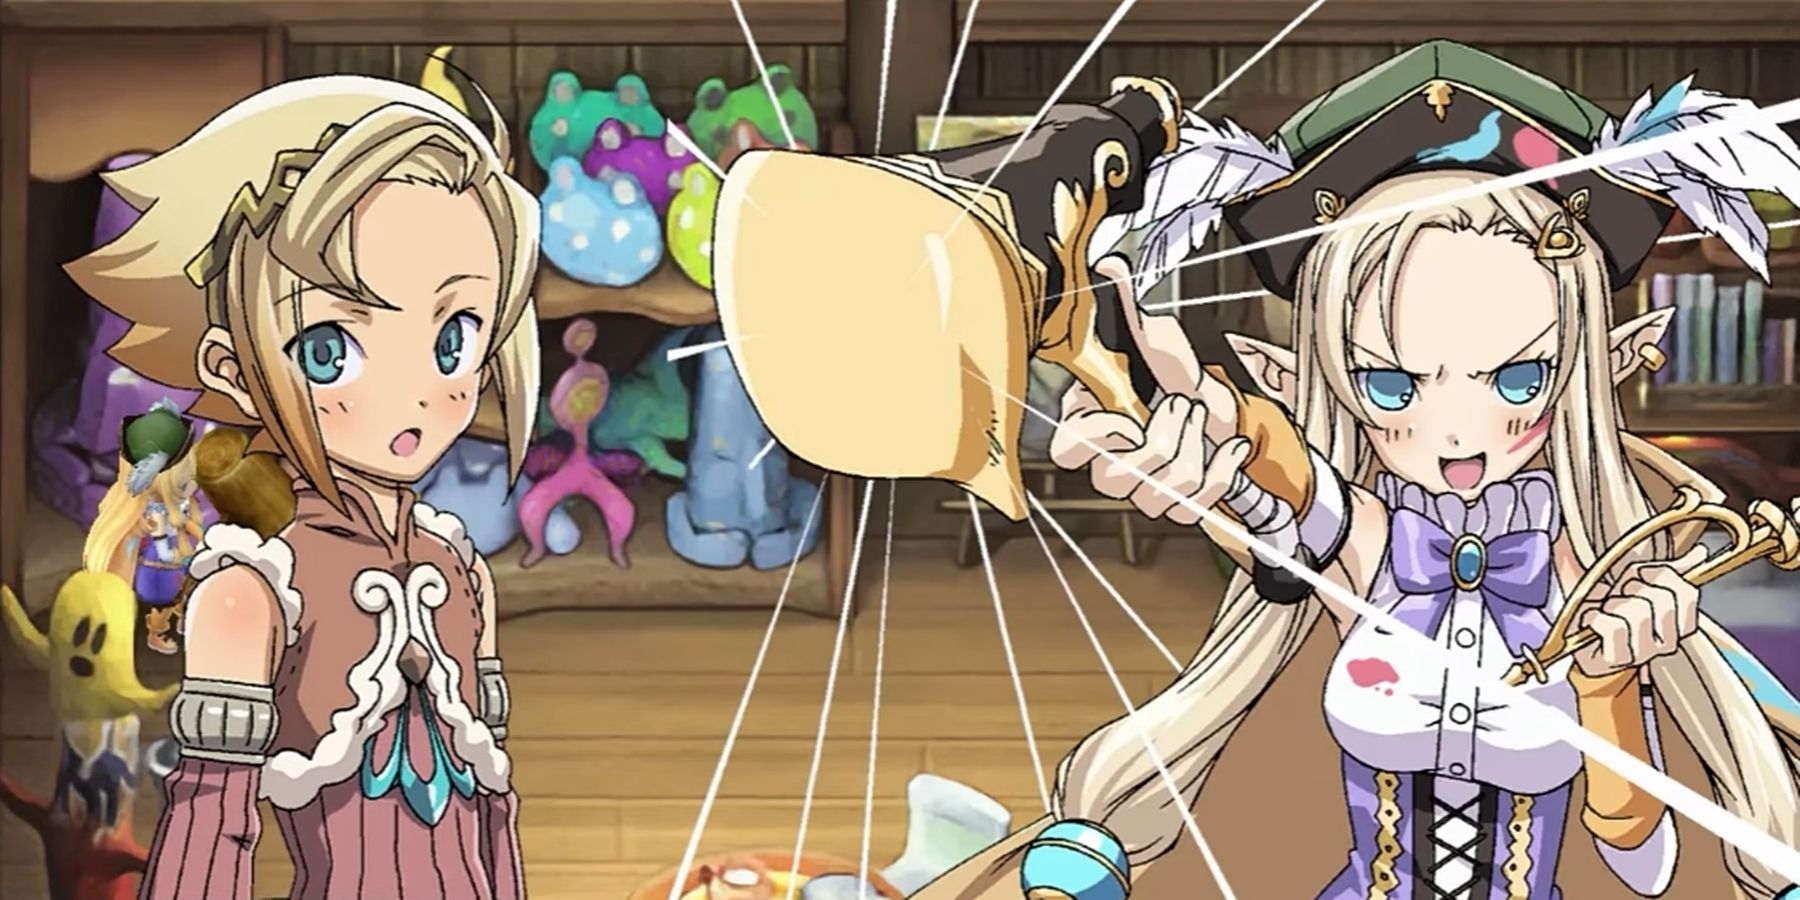 Rune Factory 3 Special Shows Off Gameplay in New
Video